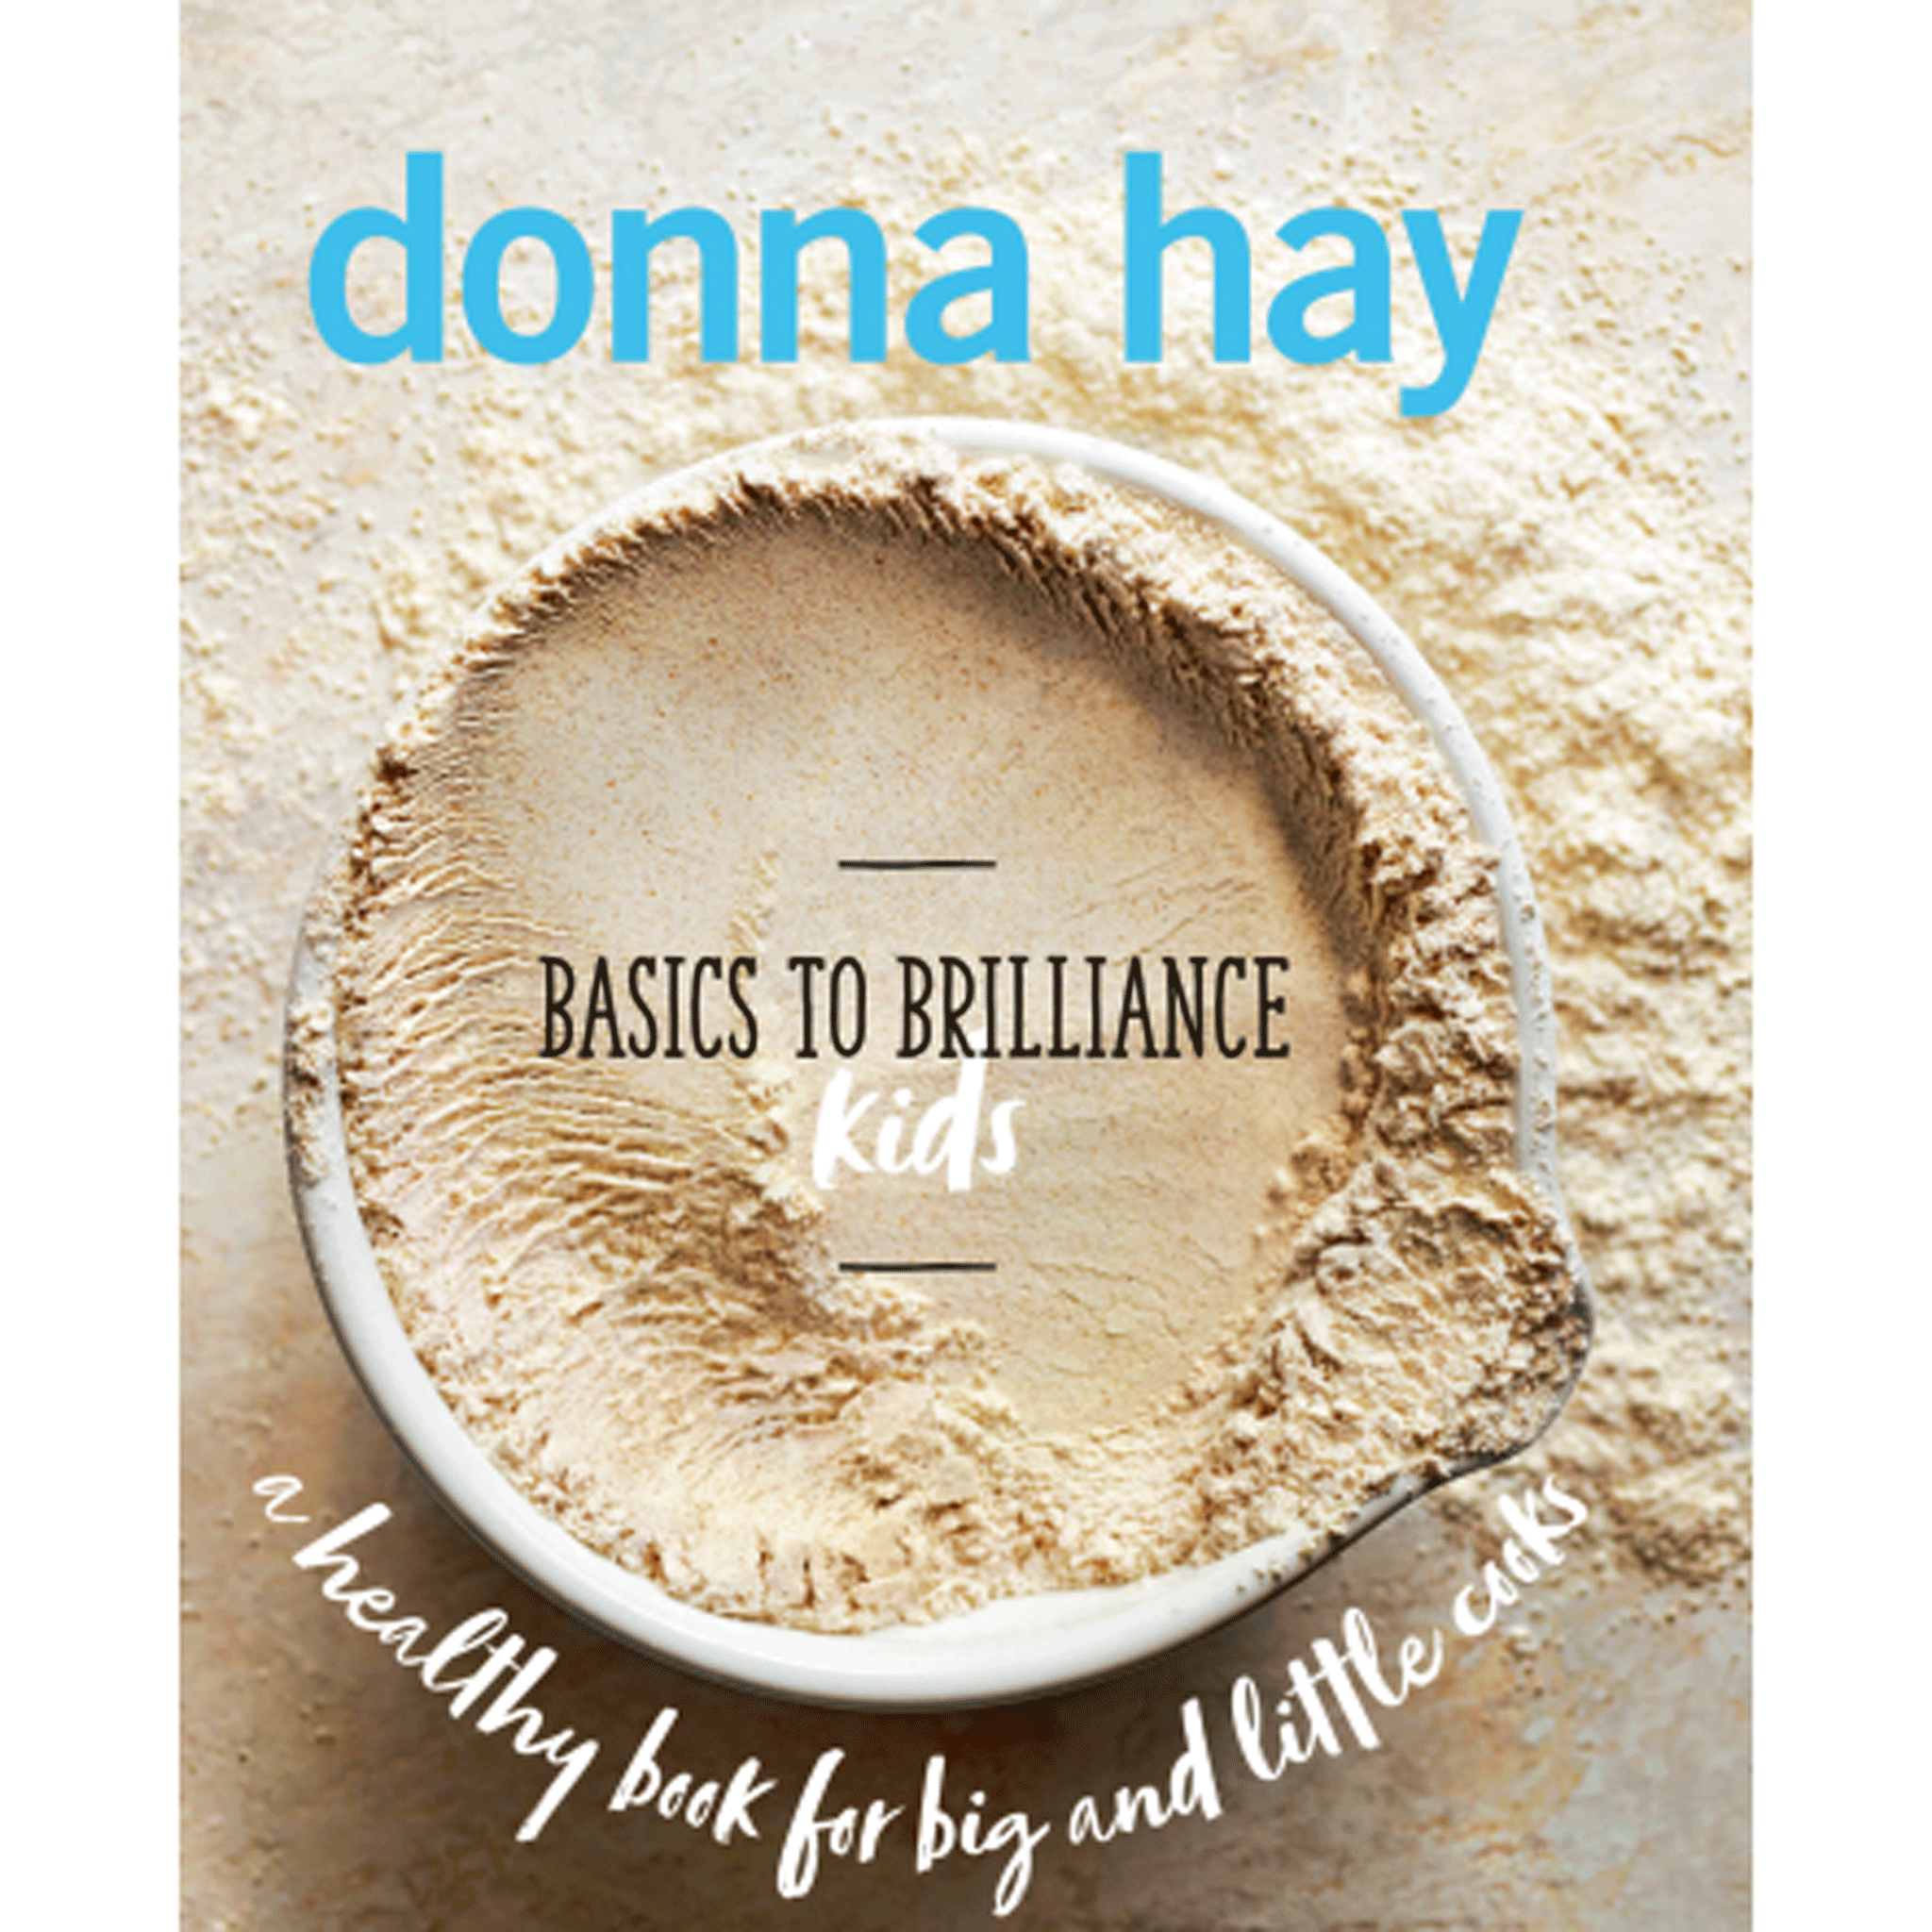 Basics To Brilliance Kids by Donna Hay 